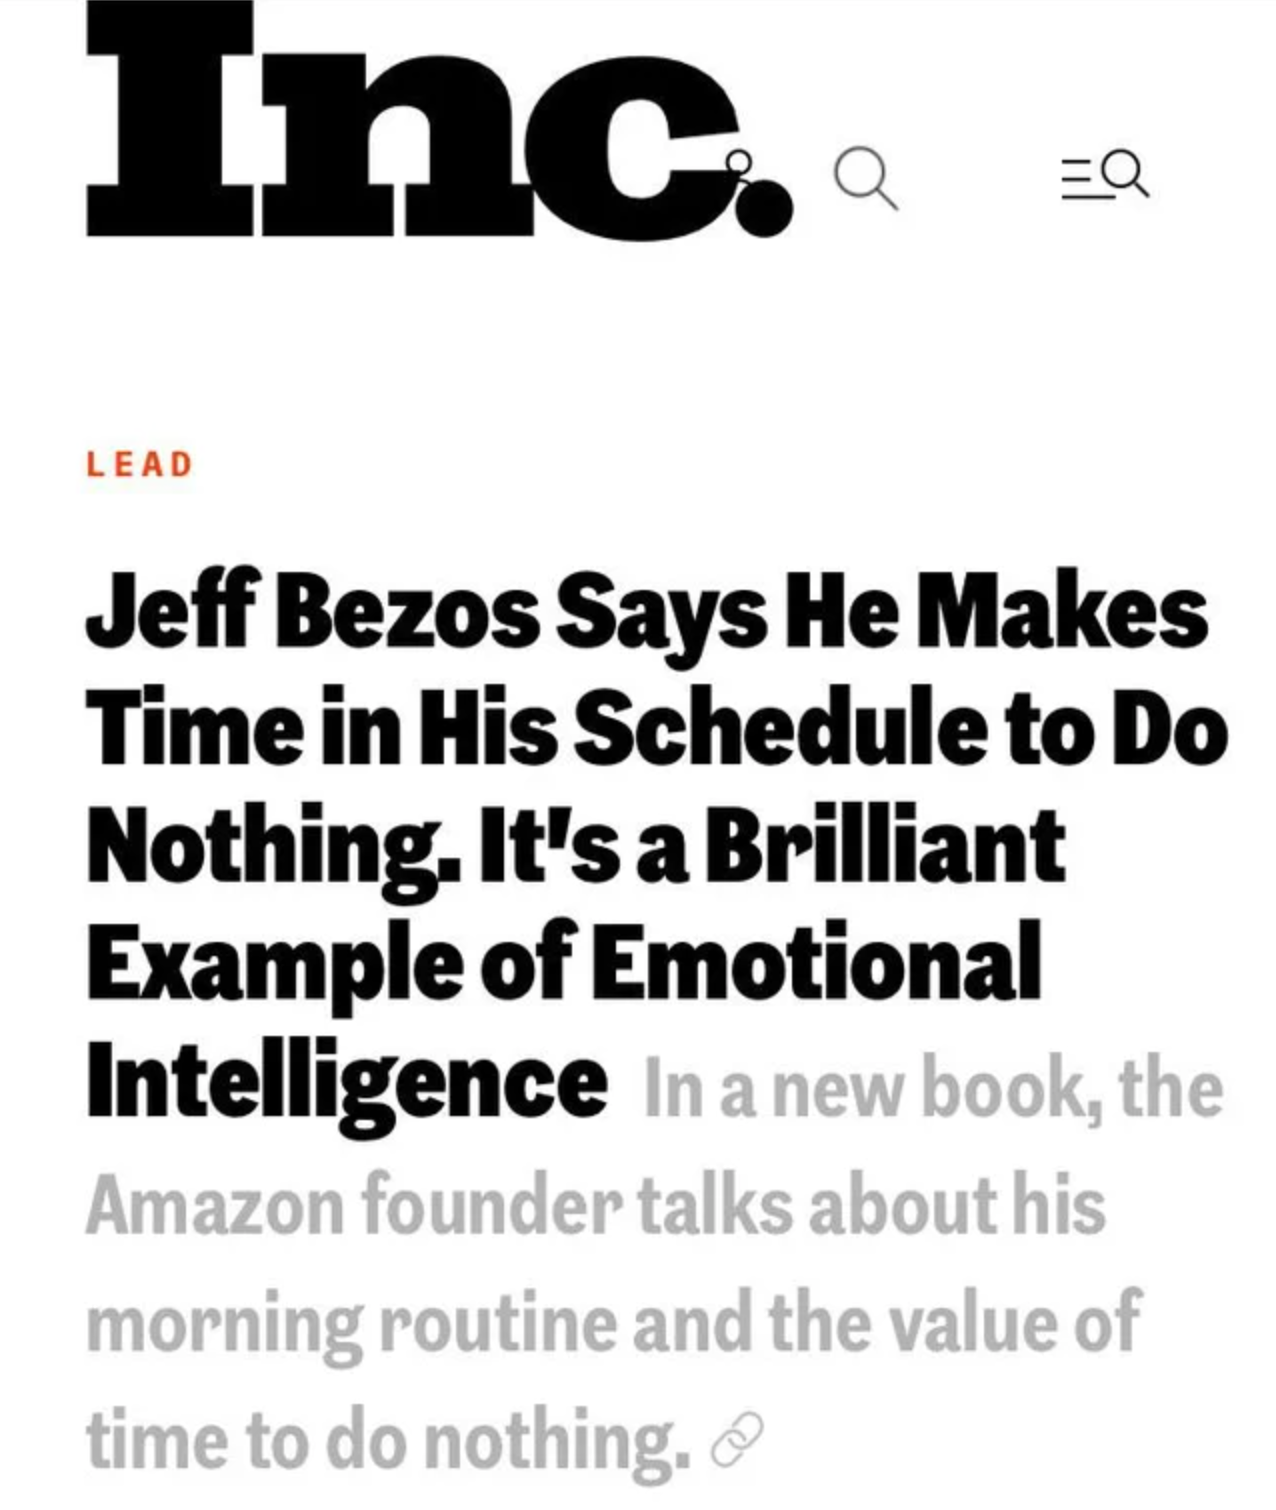 dystopian society things - inc 500 - Inc. 0 Lead Jeff Bezos Says He Makes Time in His Schedule to Do Nothing. It's a Brilliant Example of Emotional Intelligence In a new book, the Amazon founder talks about his morning routine and the value of time to do 